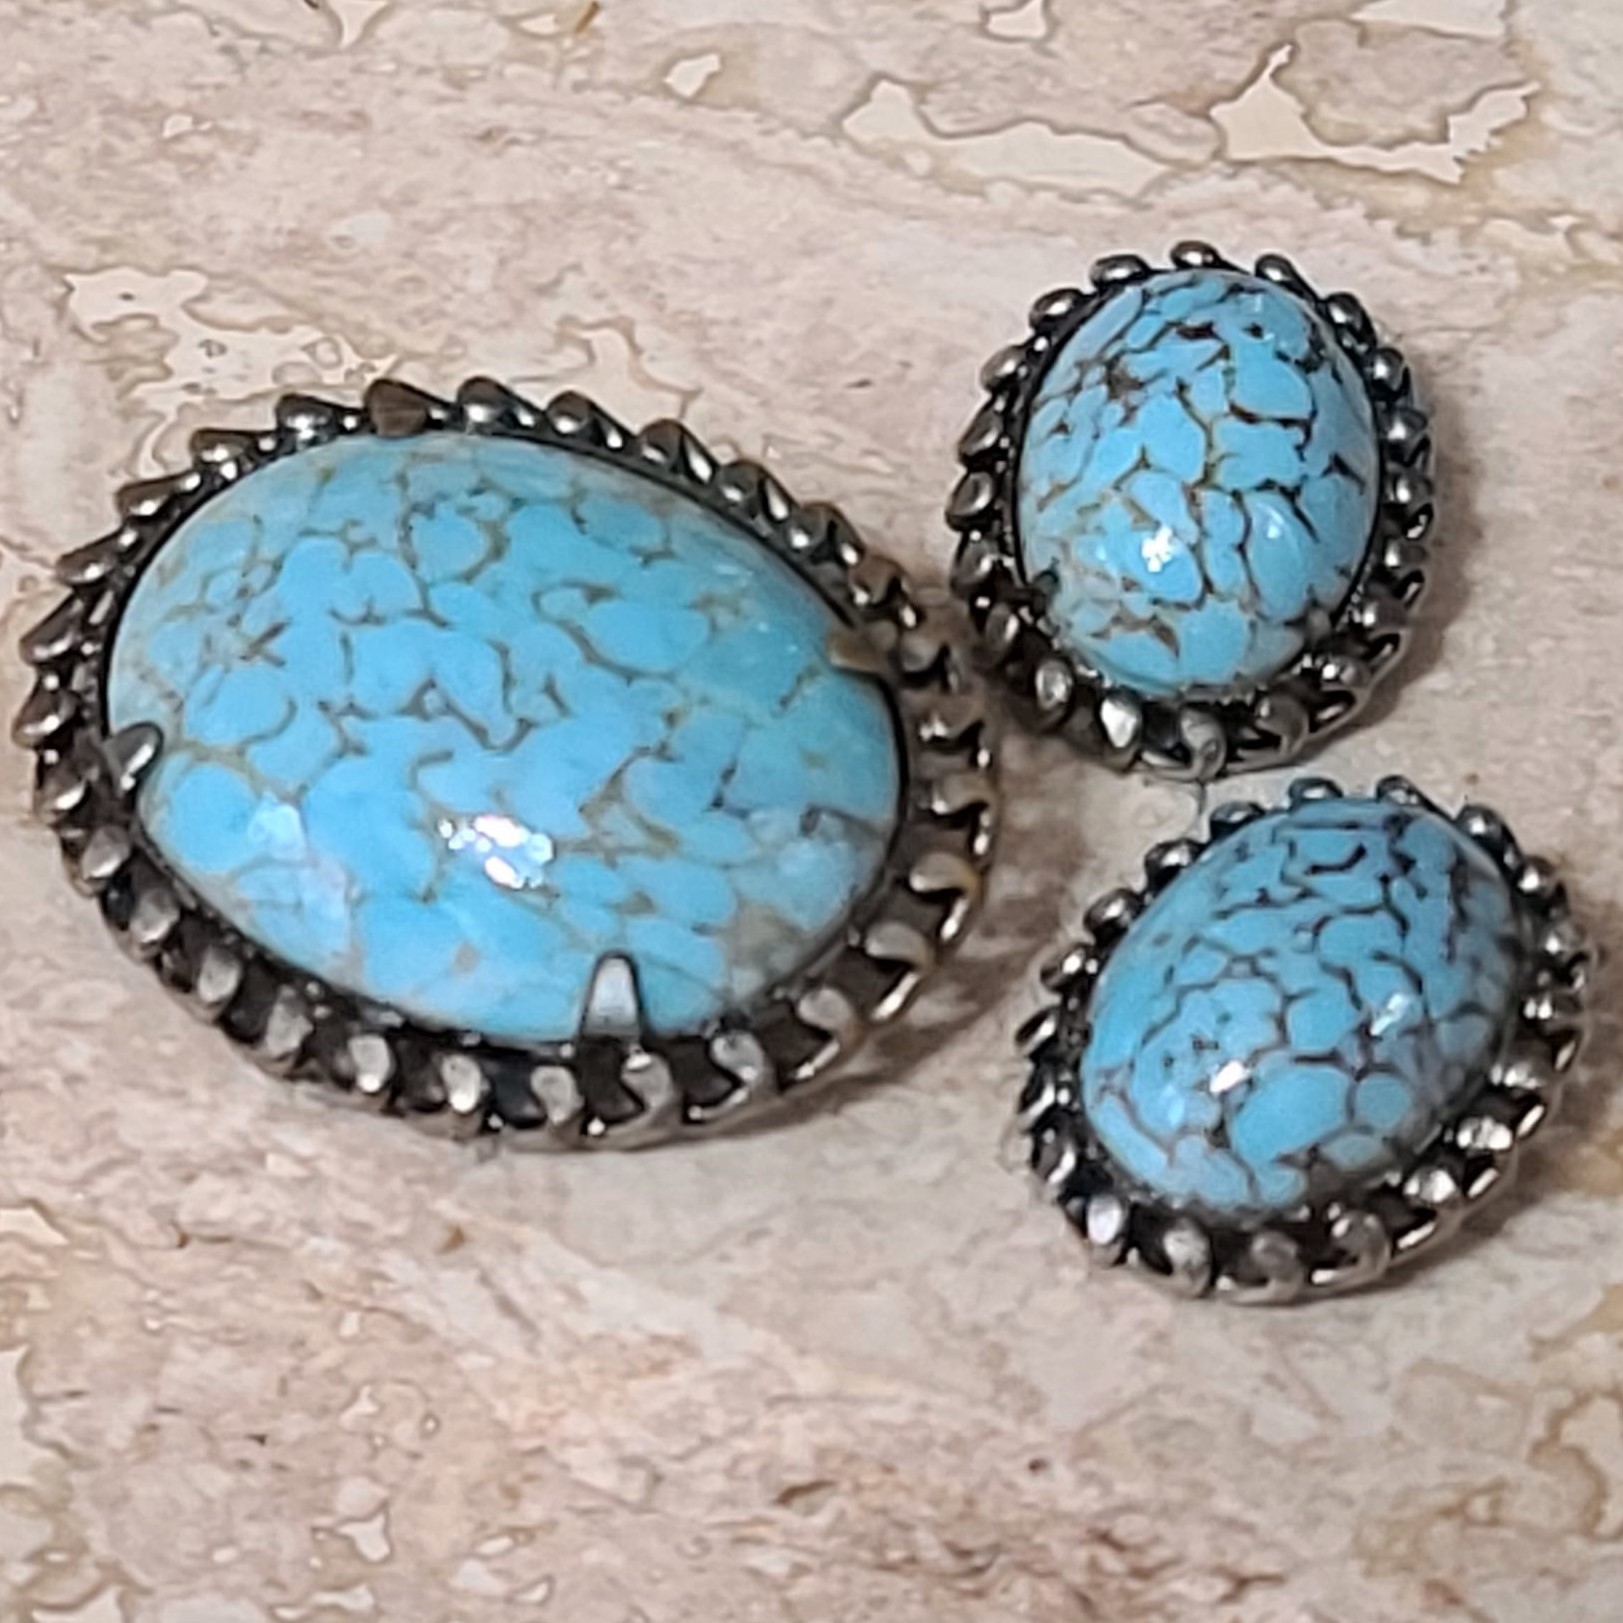 Robins egg glass turquoise pin and matched earrings clip on - Click Image to Close